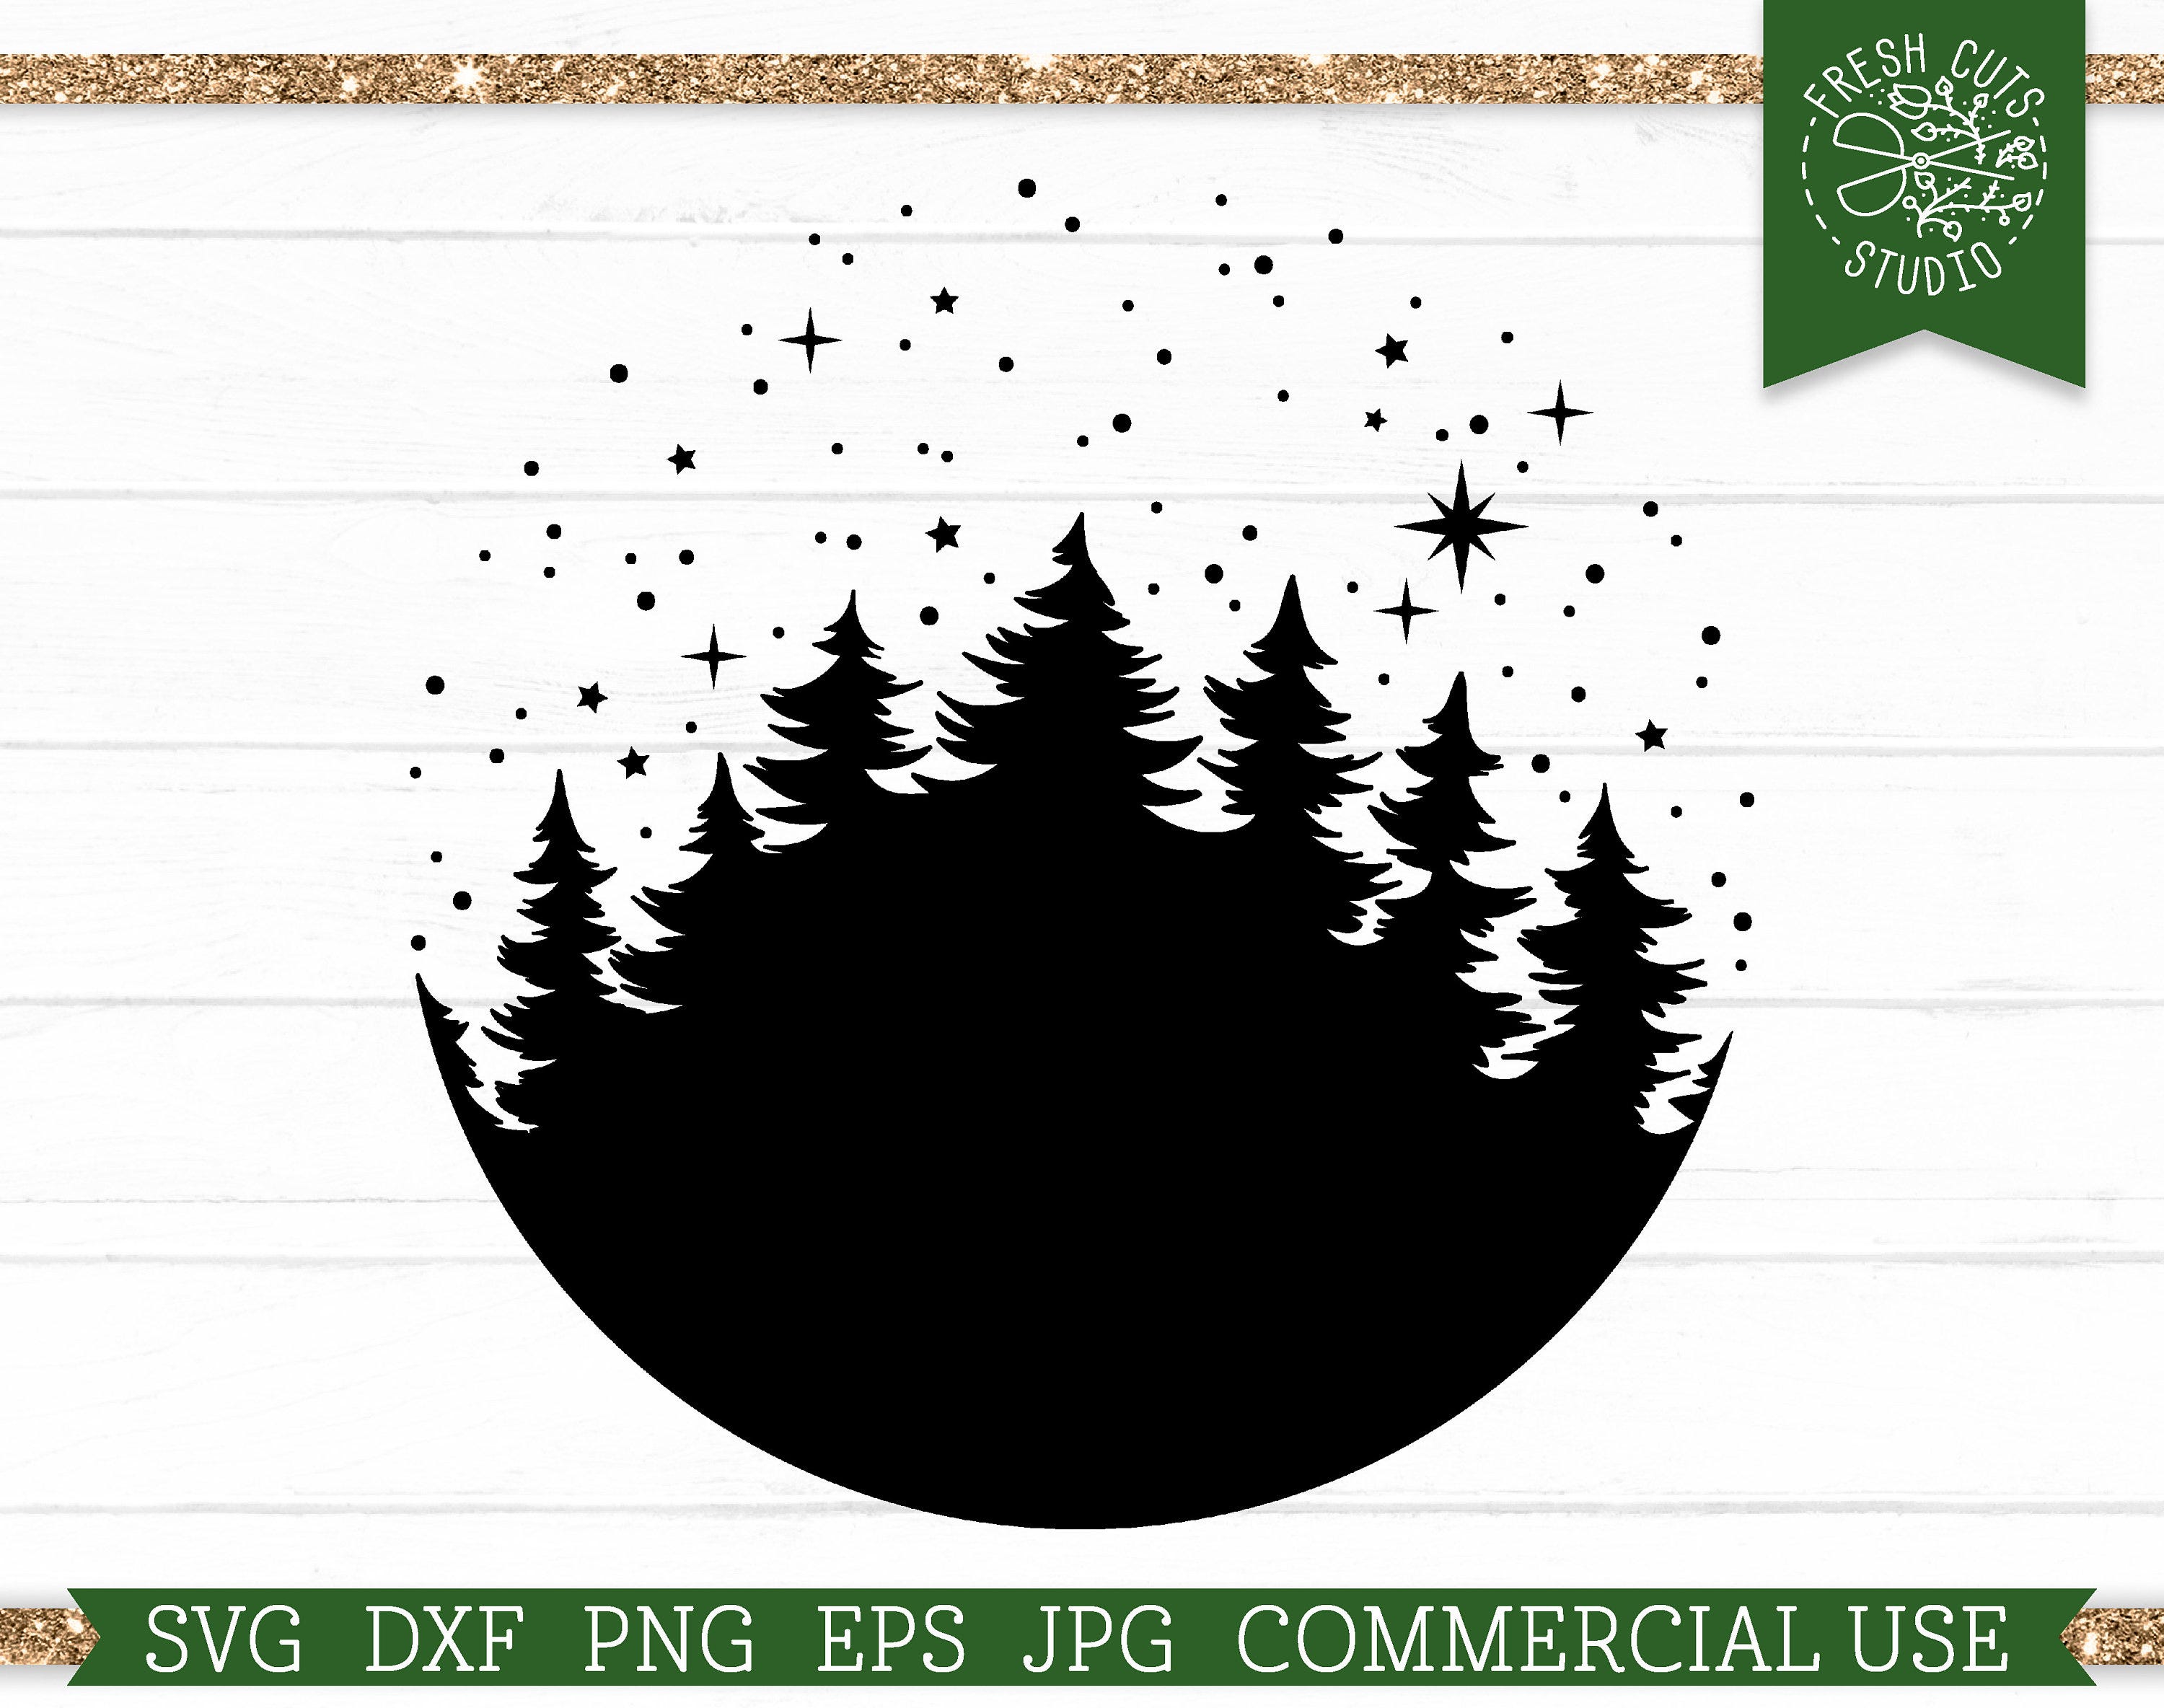 Winter Forest SVG Snowy Scene, Pine Tree Circle Cut File for Cricut Silhouette Cameo, Add your own Text, Ornament Design, Christmas png dxf